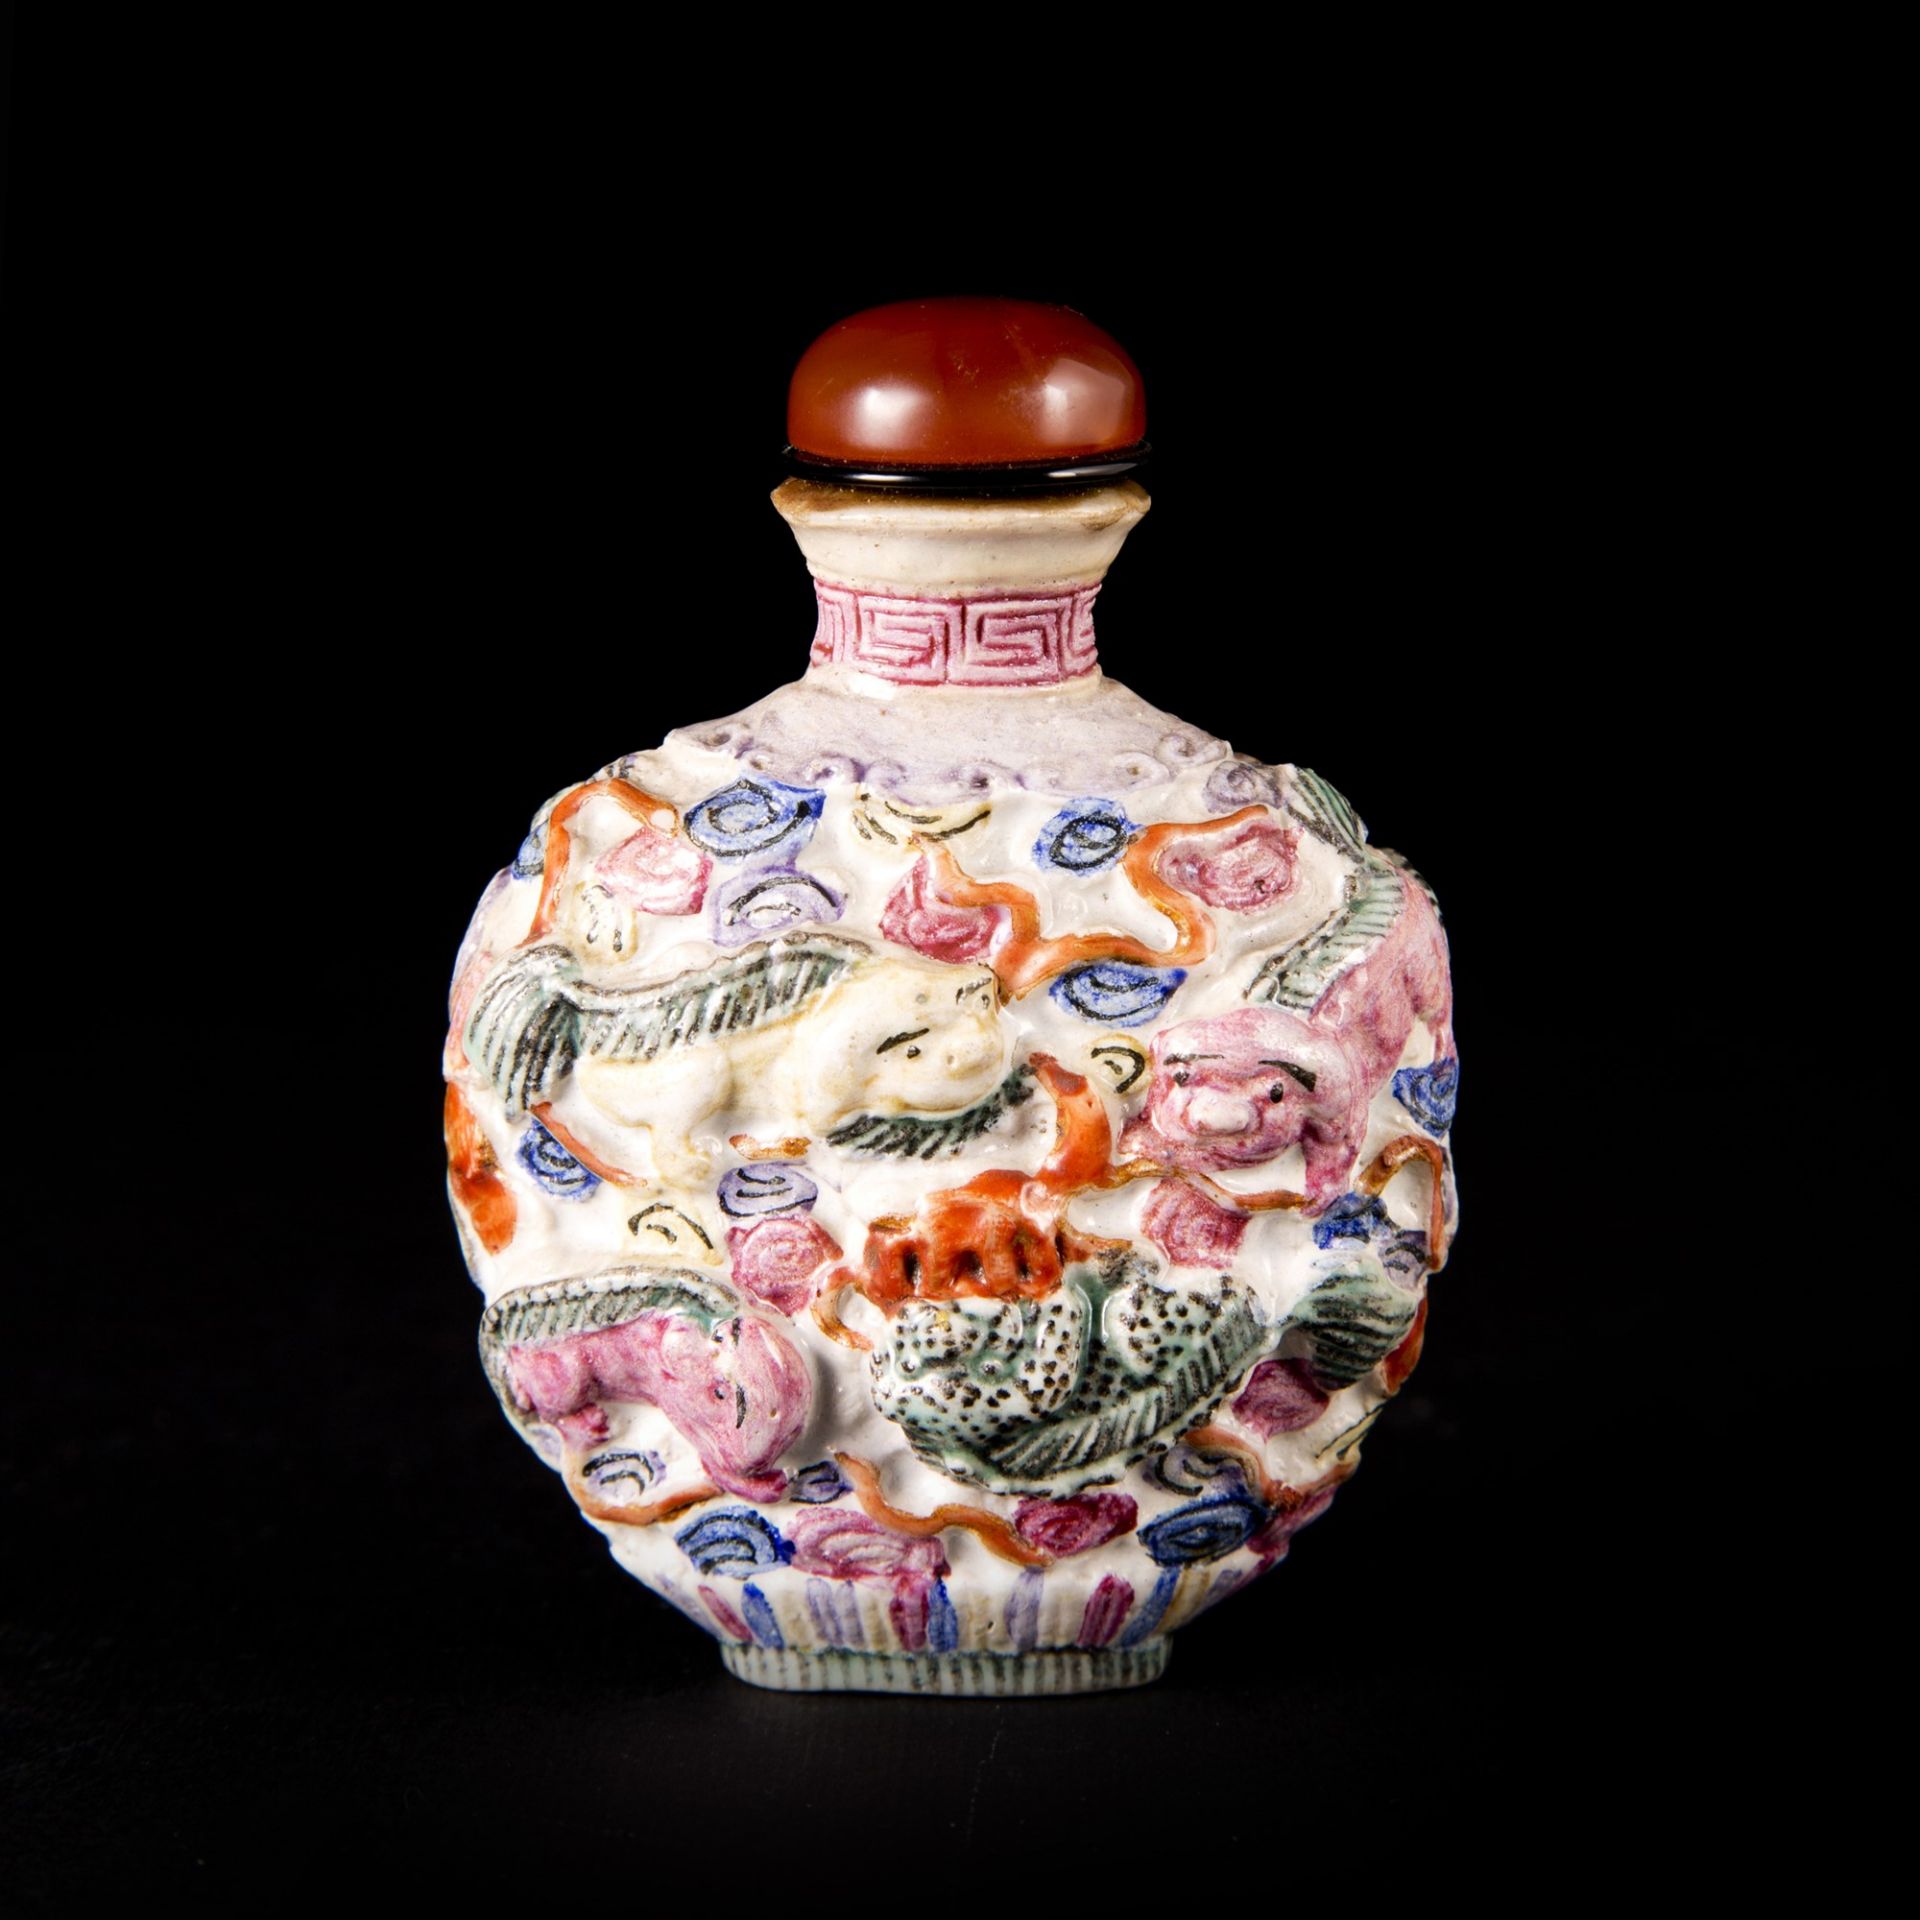 OOVERLAY GLASS SNUFF BOTTLE h. 7,6 cm